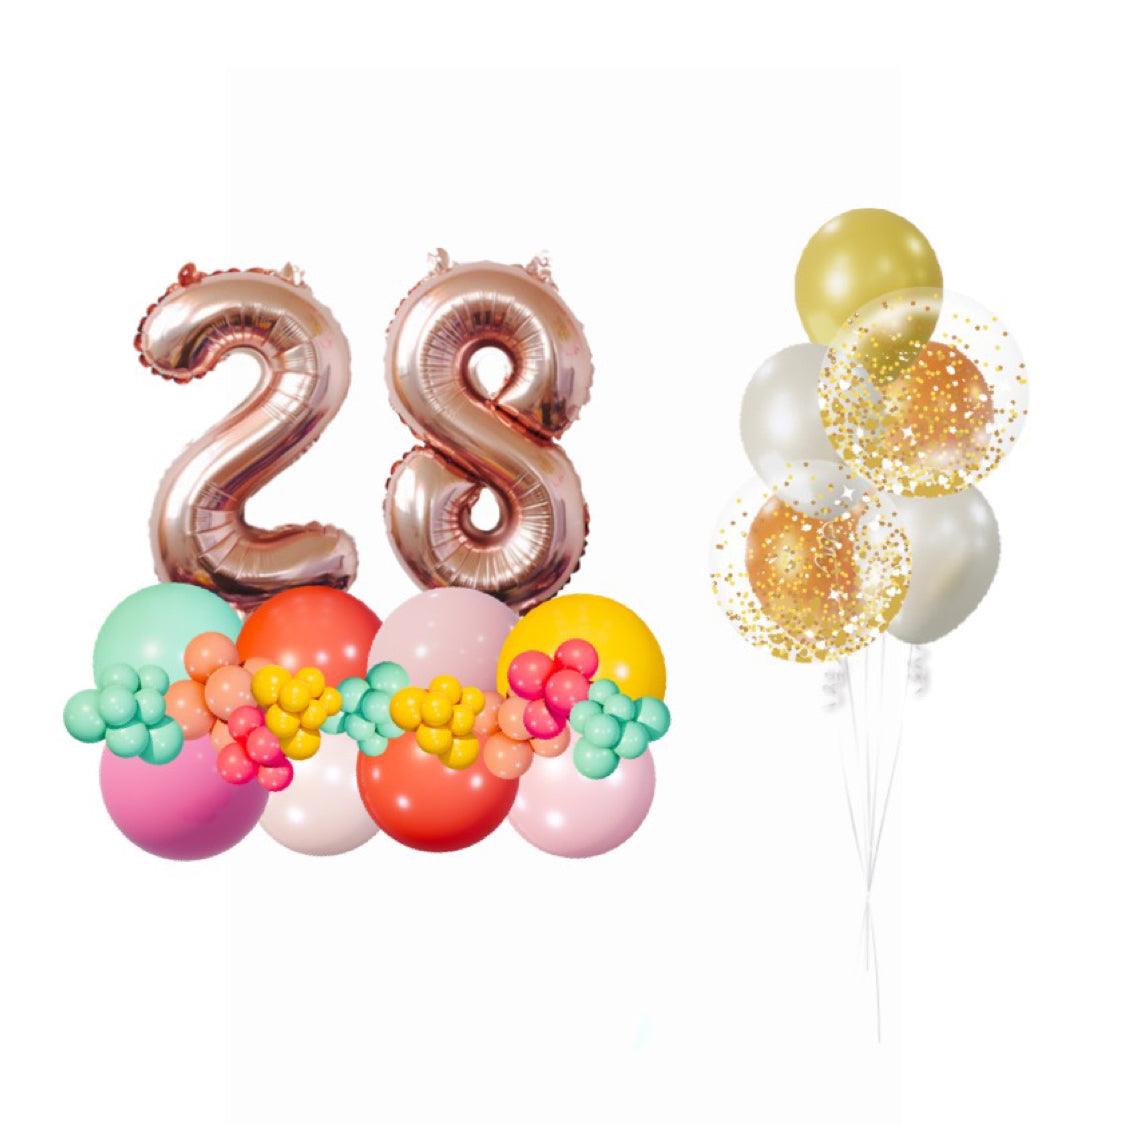 COLORFUL BLOOM - CONFETTI BOUQUET & NUMBER PEDESTALS SET - ONE UP BALLOONS